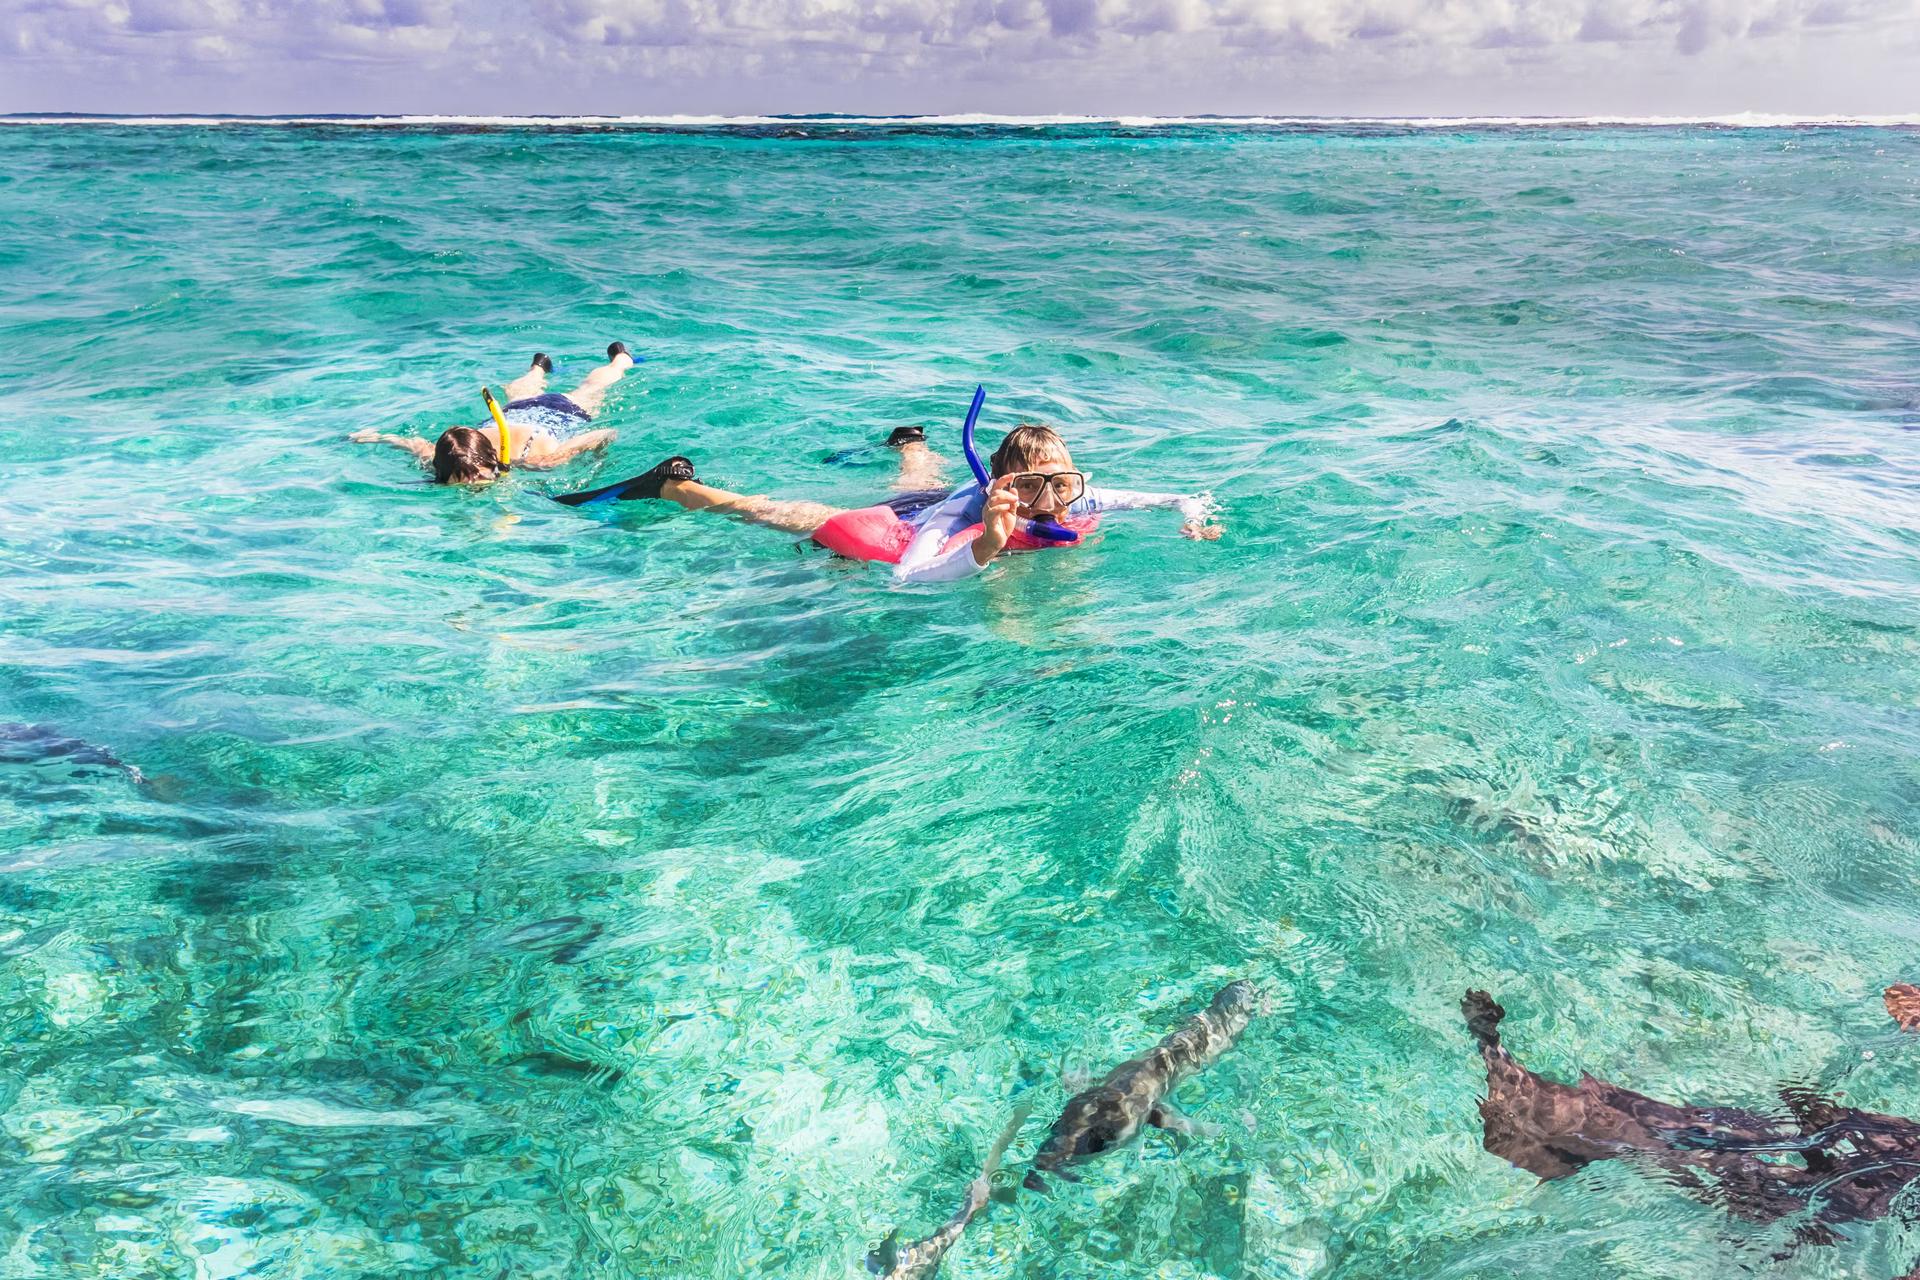 People snorkeling in clear turquoise waters at the reef near Caye Caulker in Belize